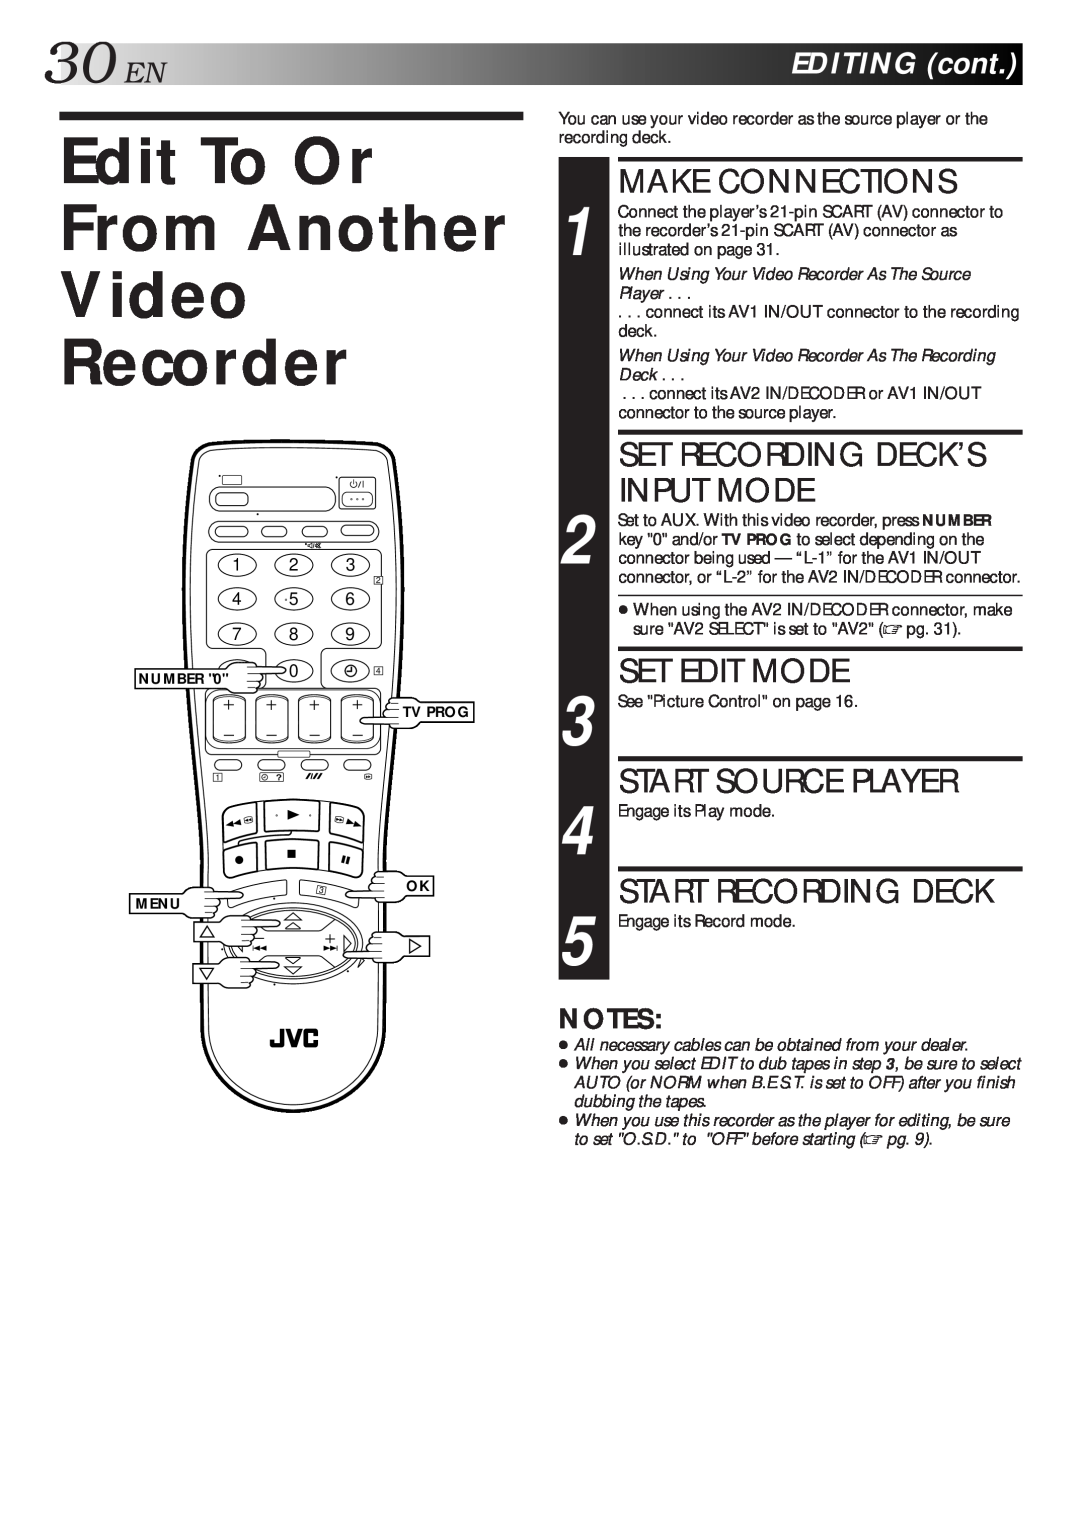 JVC HR-J712EU Edit To Or From Another Video Recorder, 30EN, Set Recording Deck’S, Input Mode, Start Source Player 